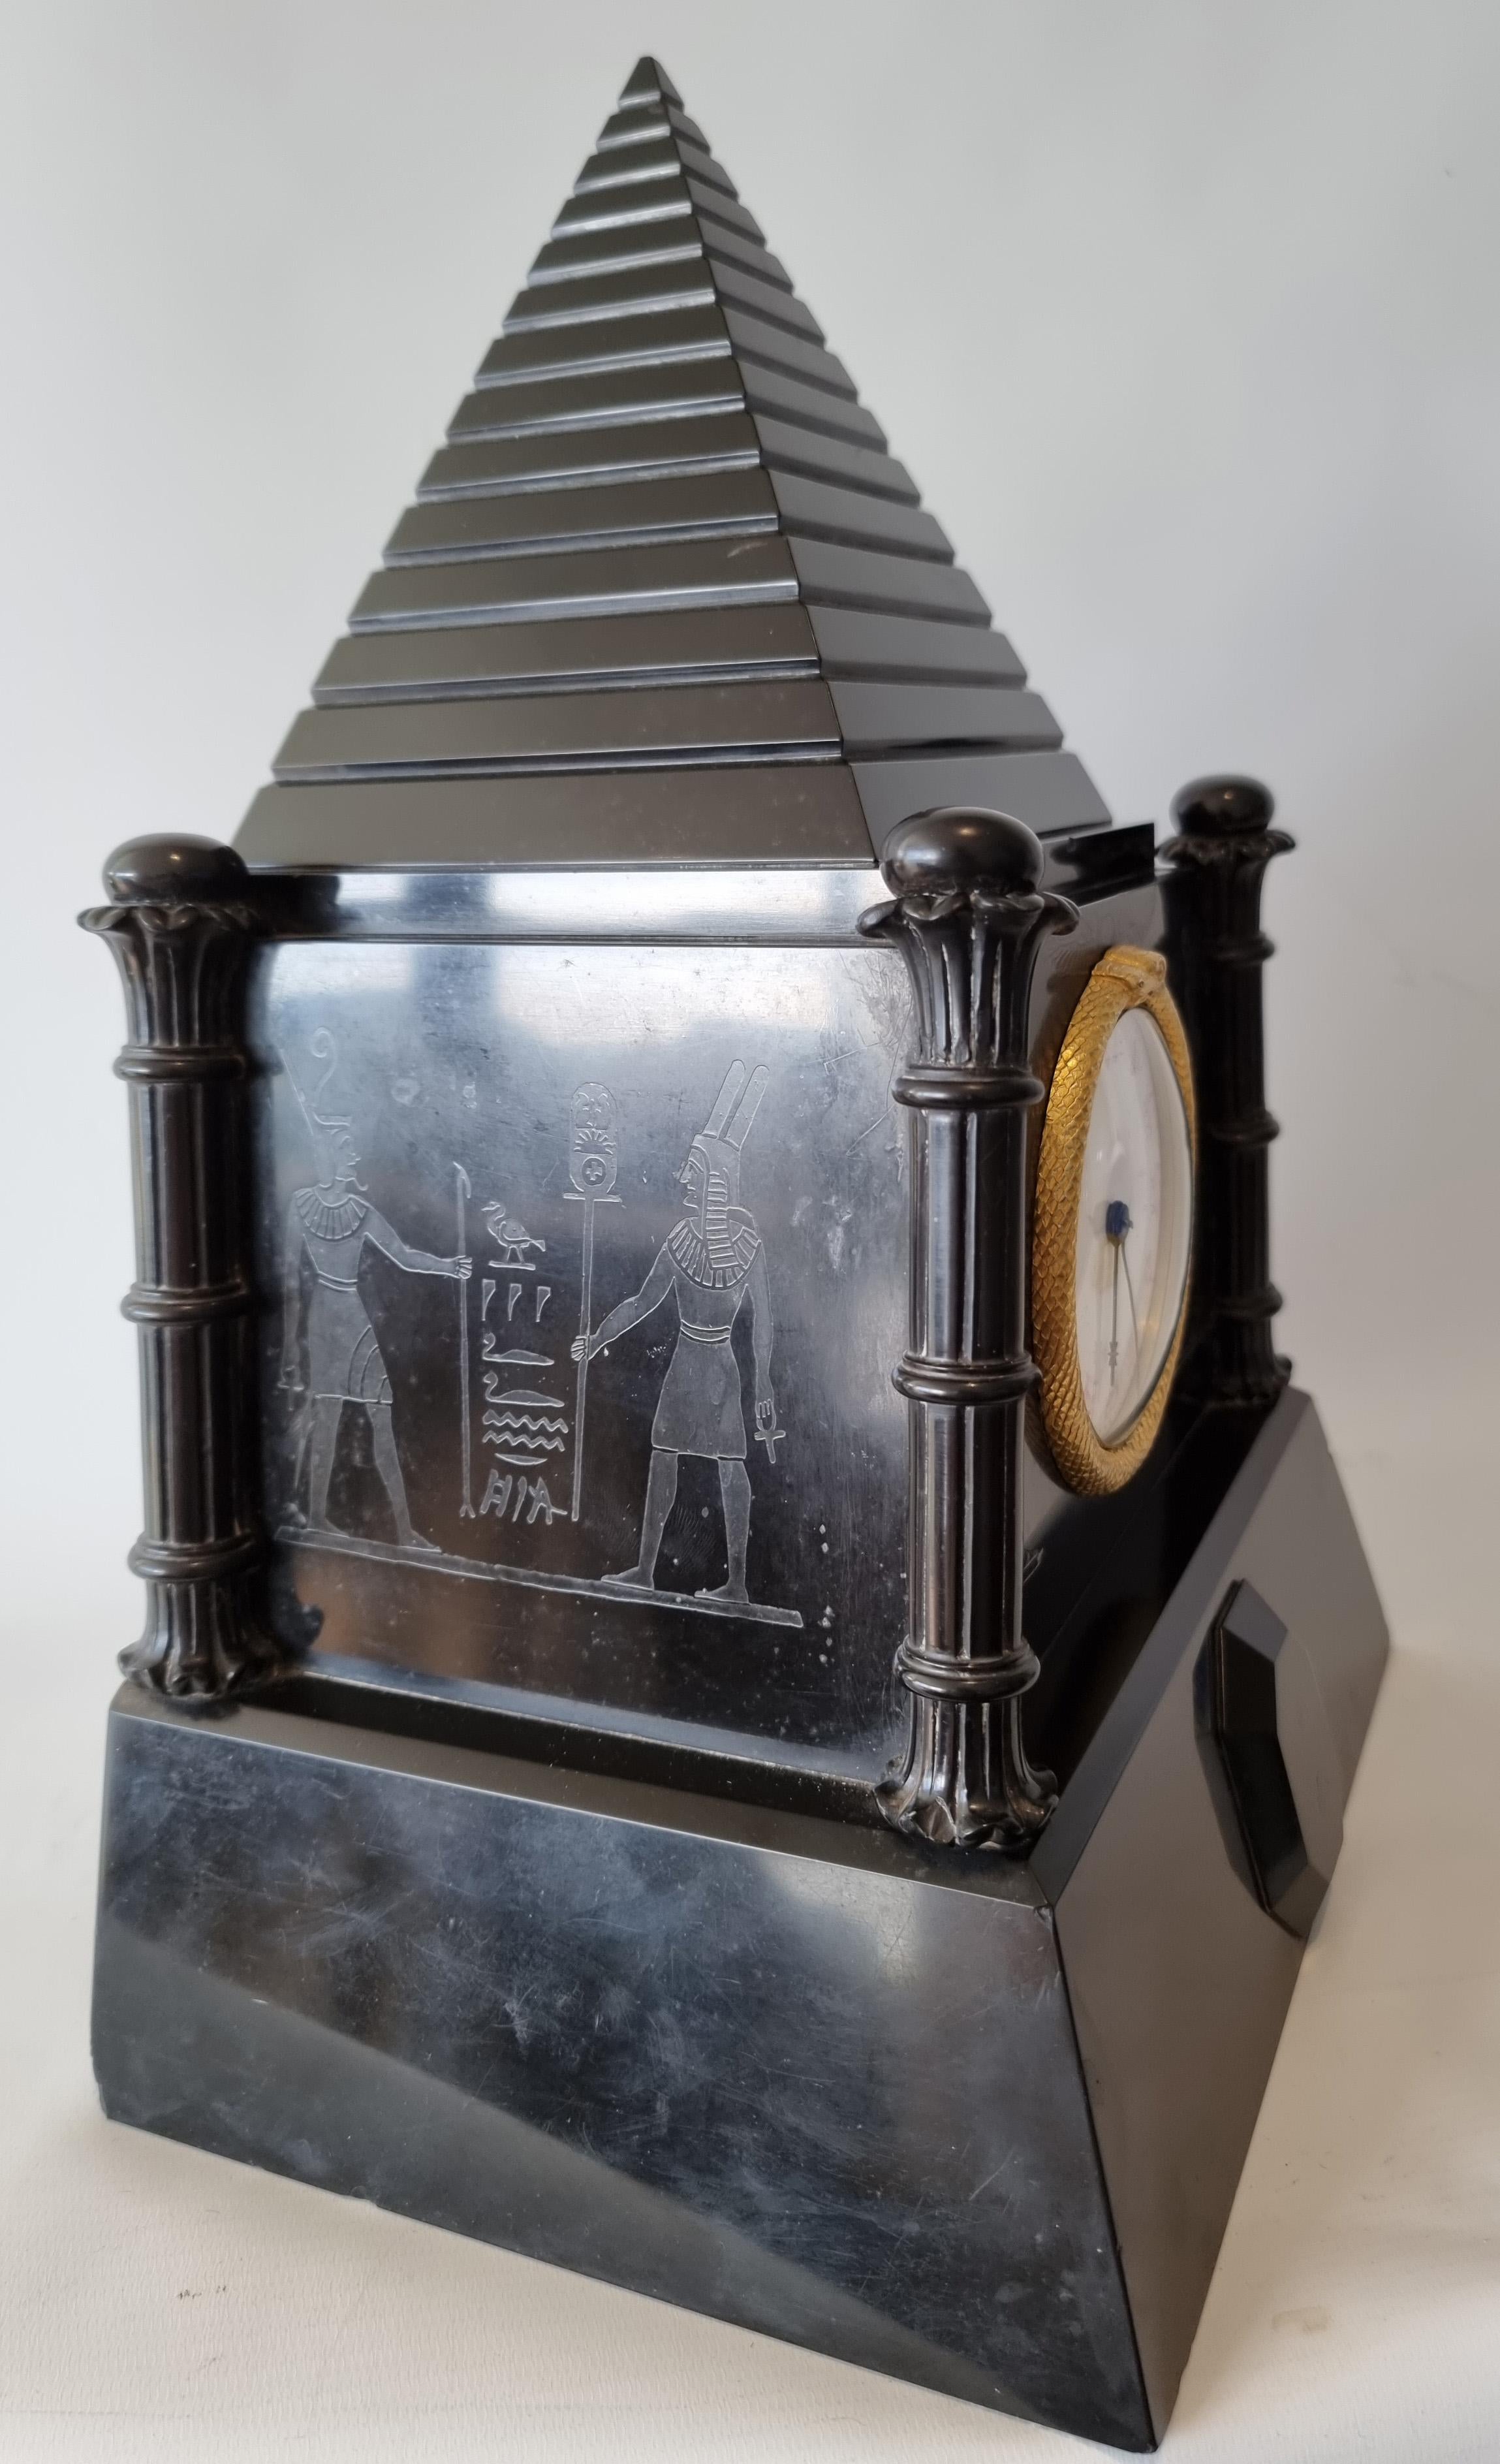 A fabulous and very rare antique English, Egyptian revival mantel clock with fusee movement by John Moore and Sons of London. This clock has a number of very unusual features. Constructed entirely of Derbyshire black marble it's shape is most